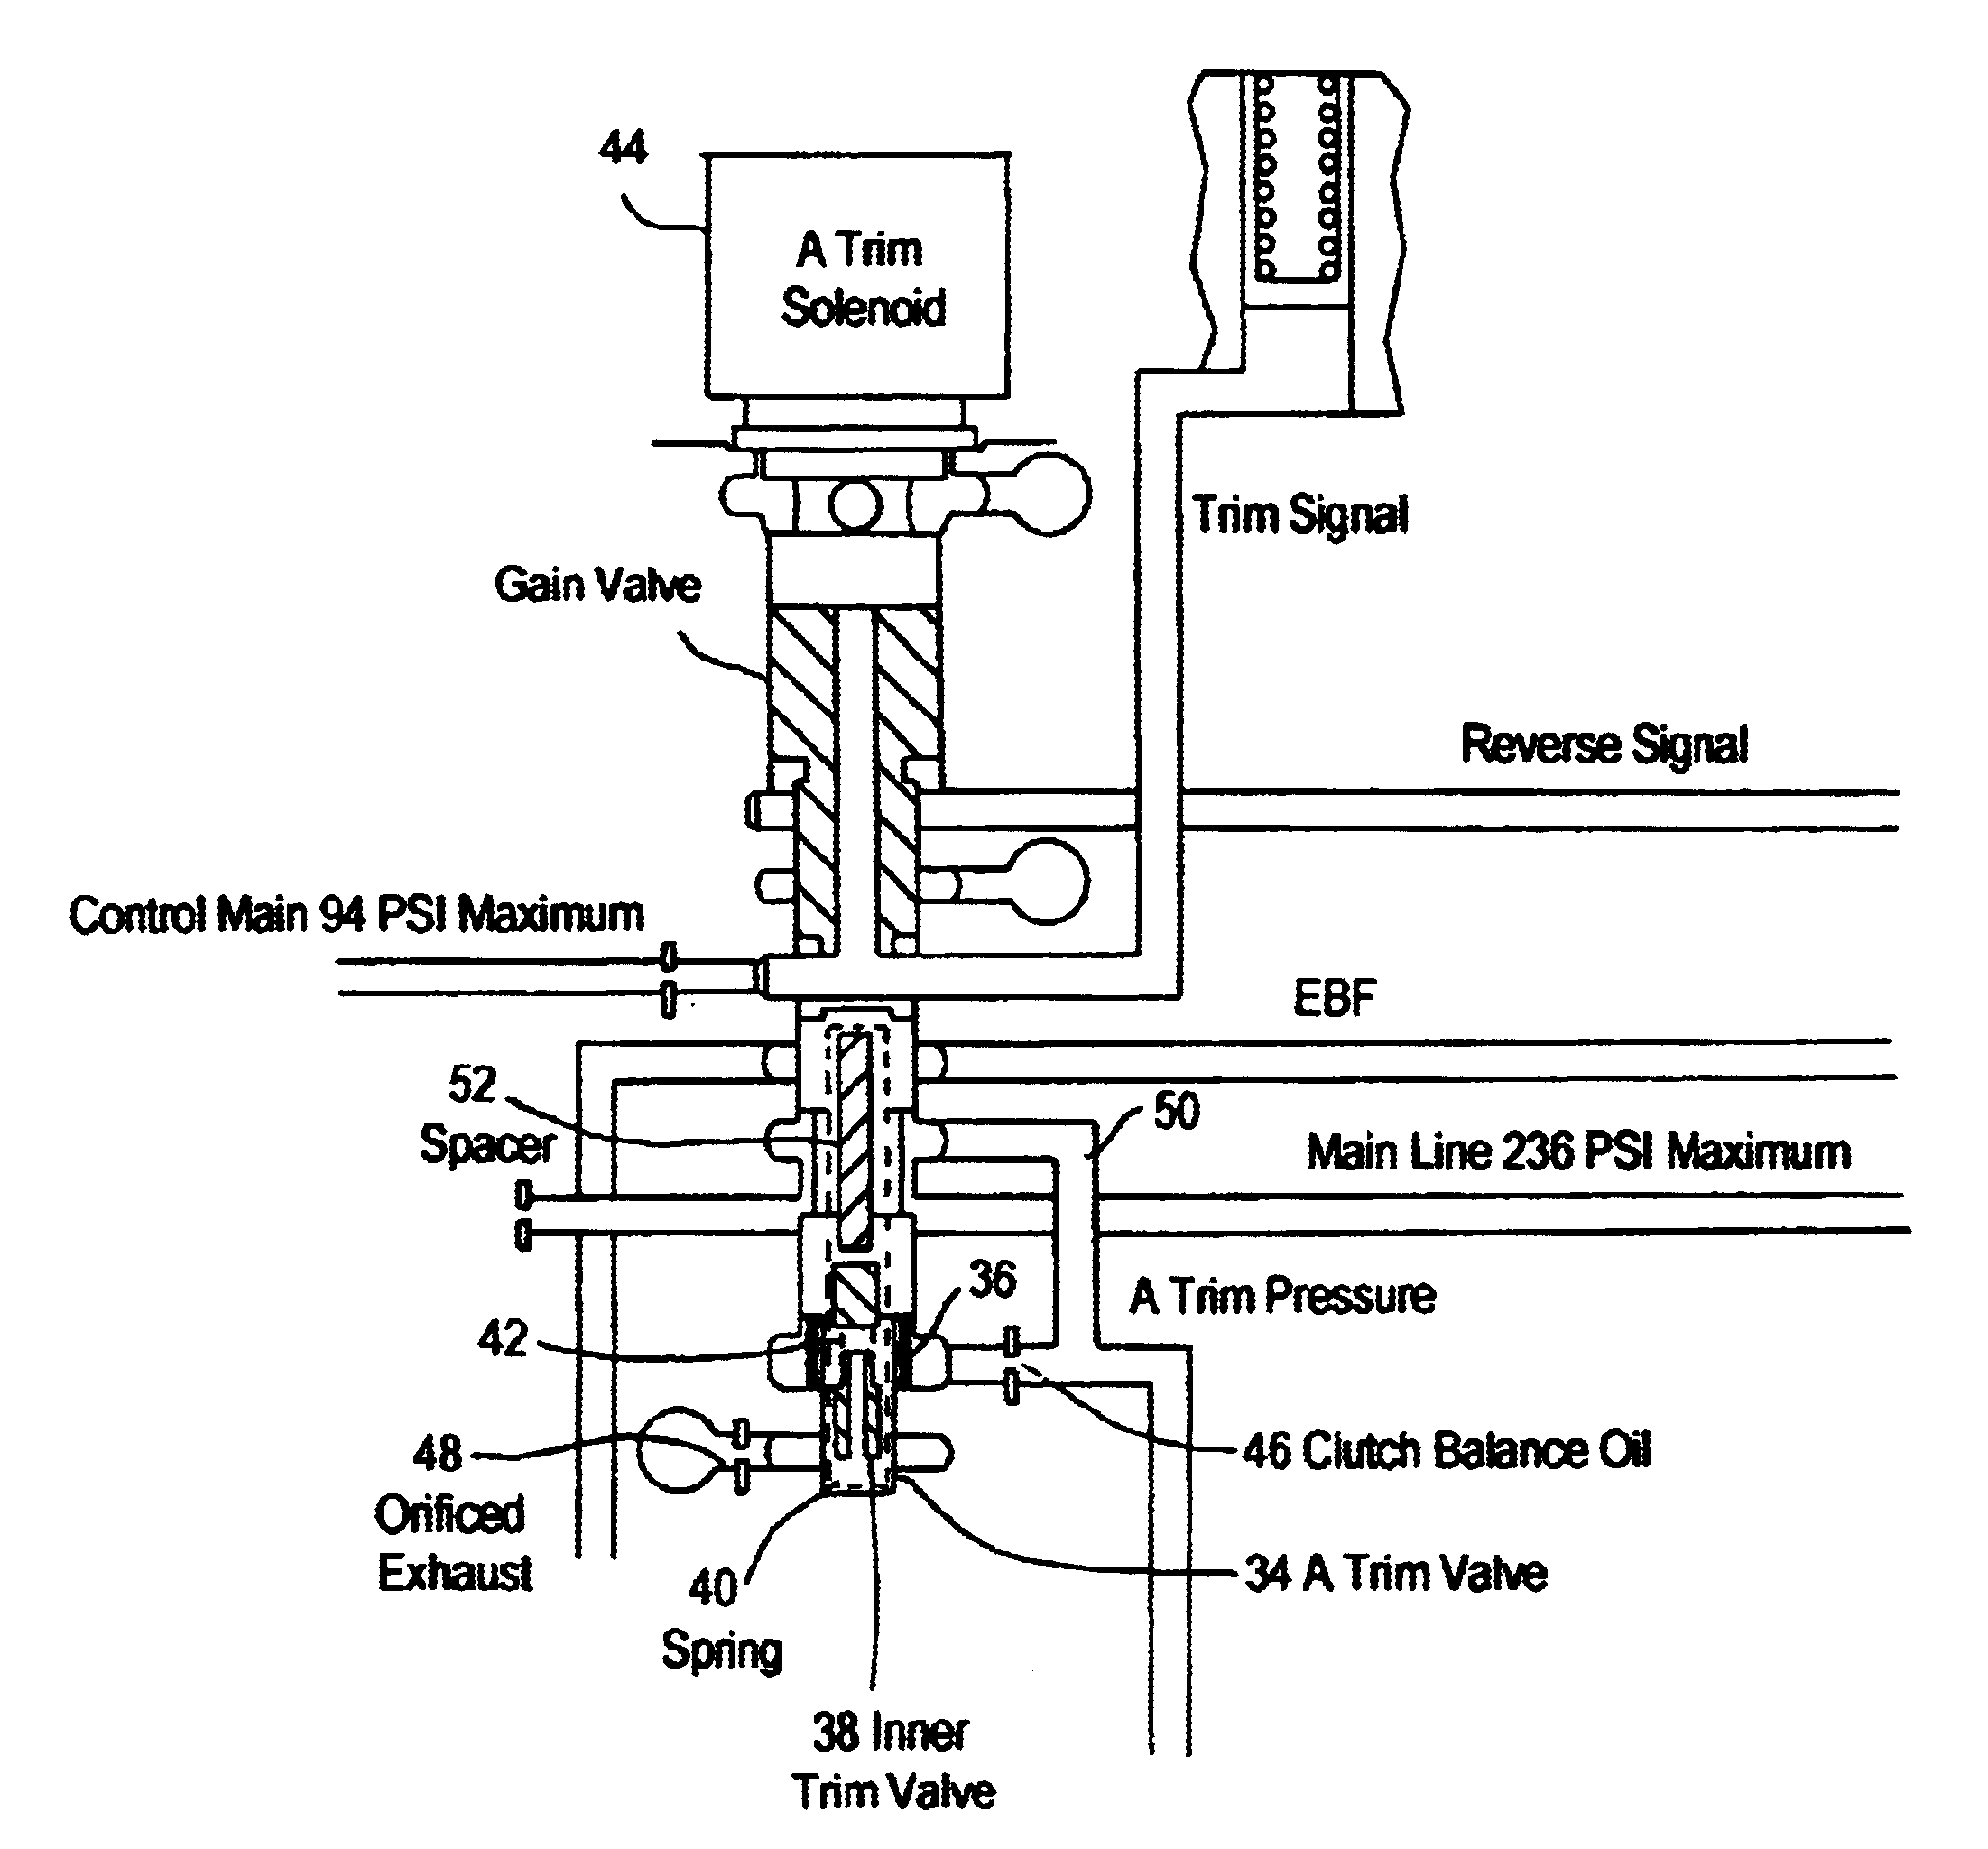 Methods and systems for improving the operation of transmissions for motor vehicles